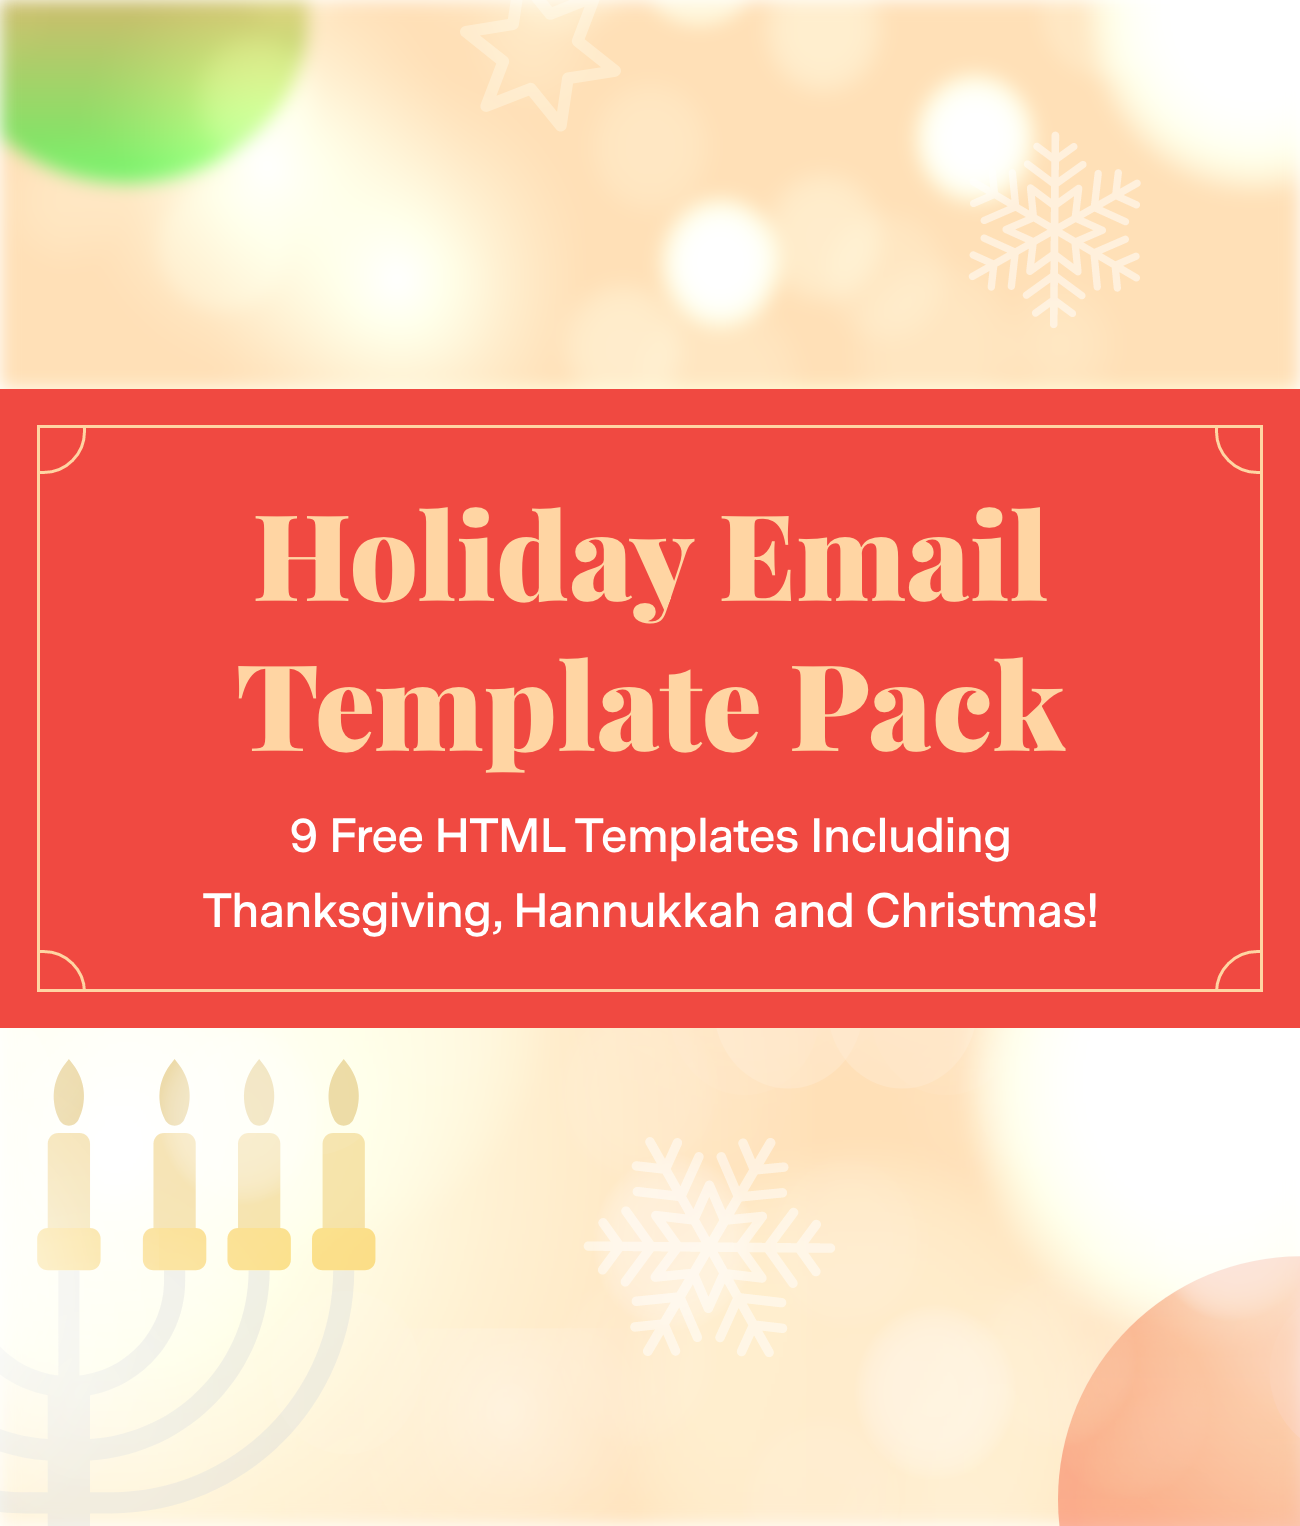 Holiday Email - Template Pack (1)